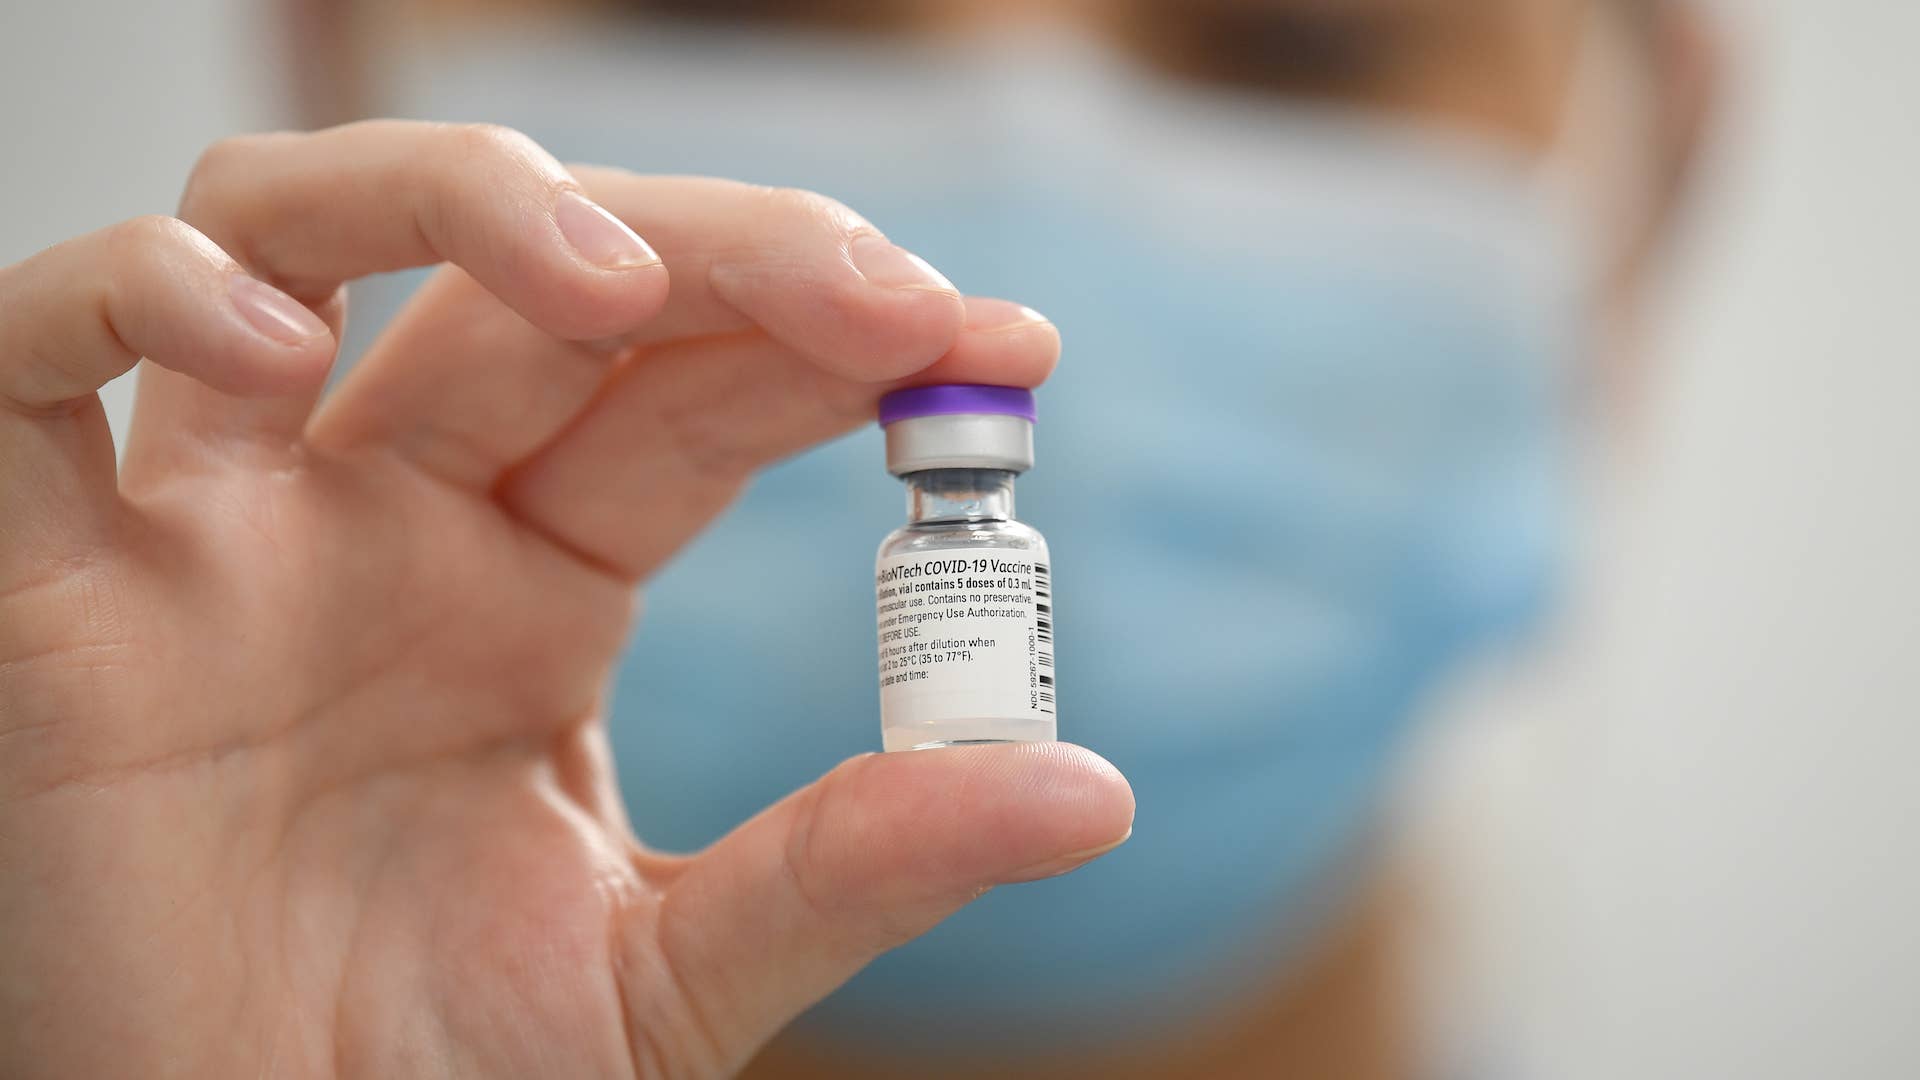 Photograph of the COVID 19 vaccine